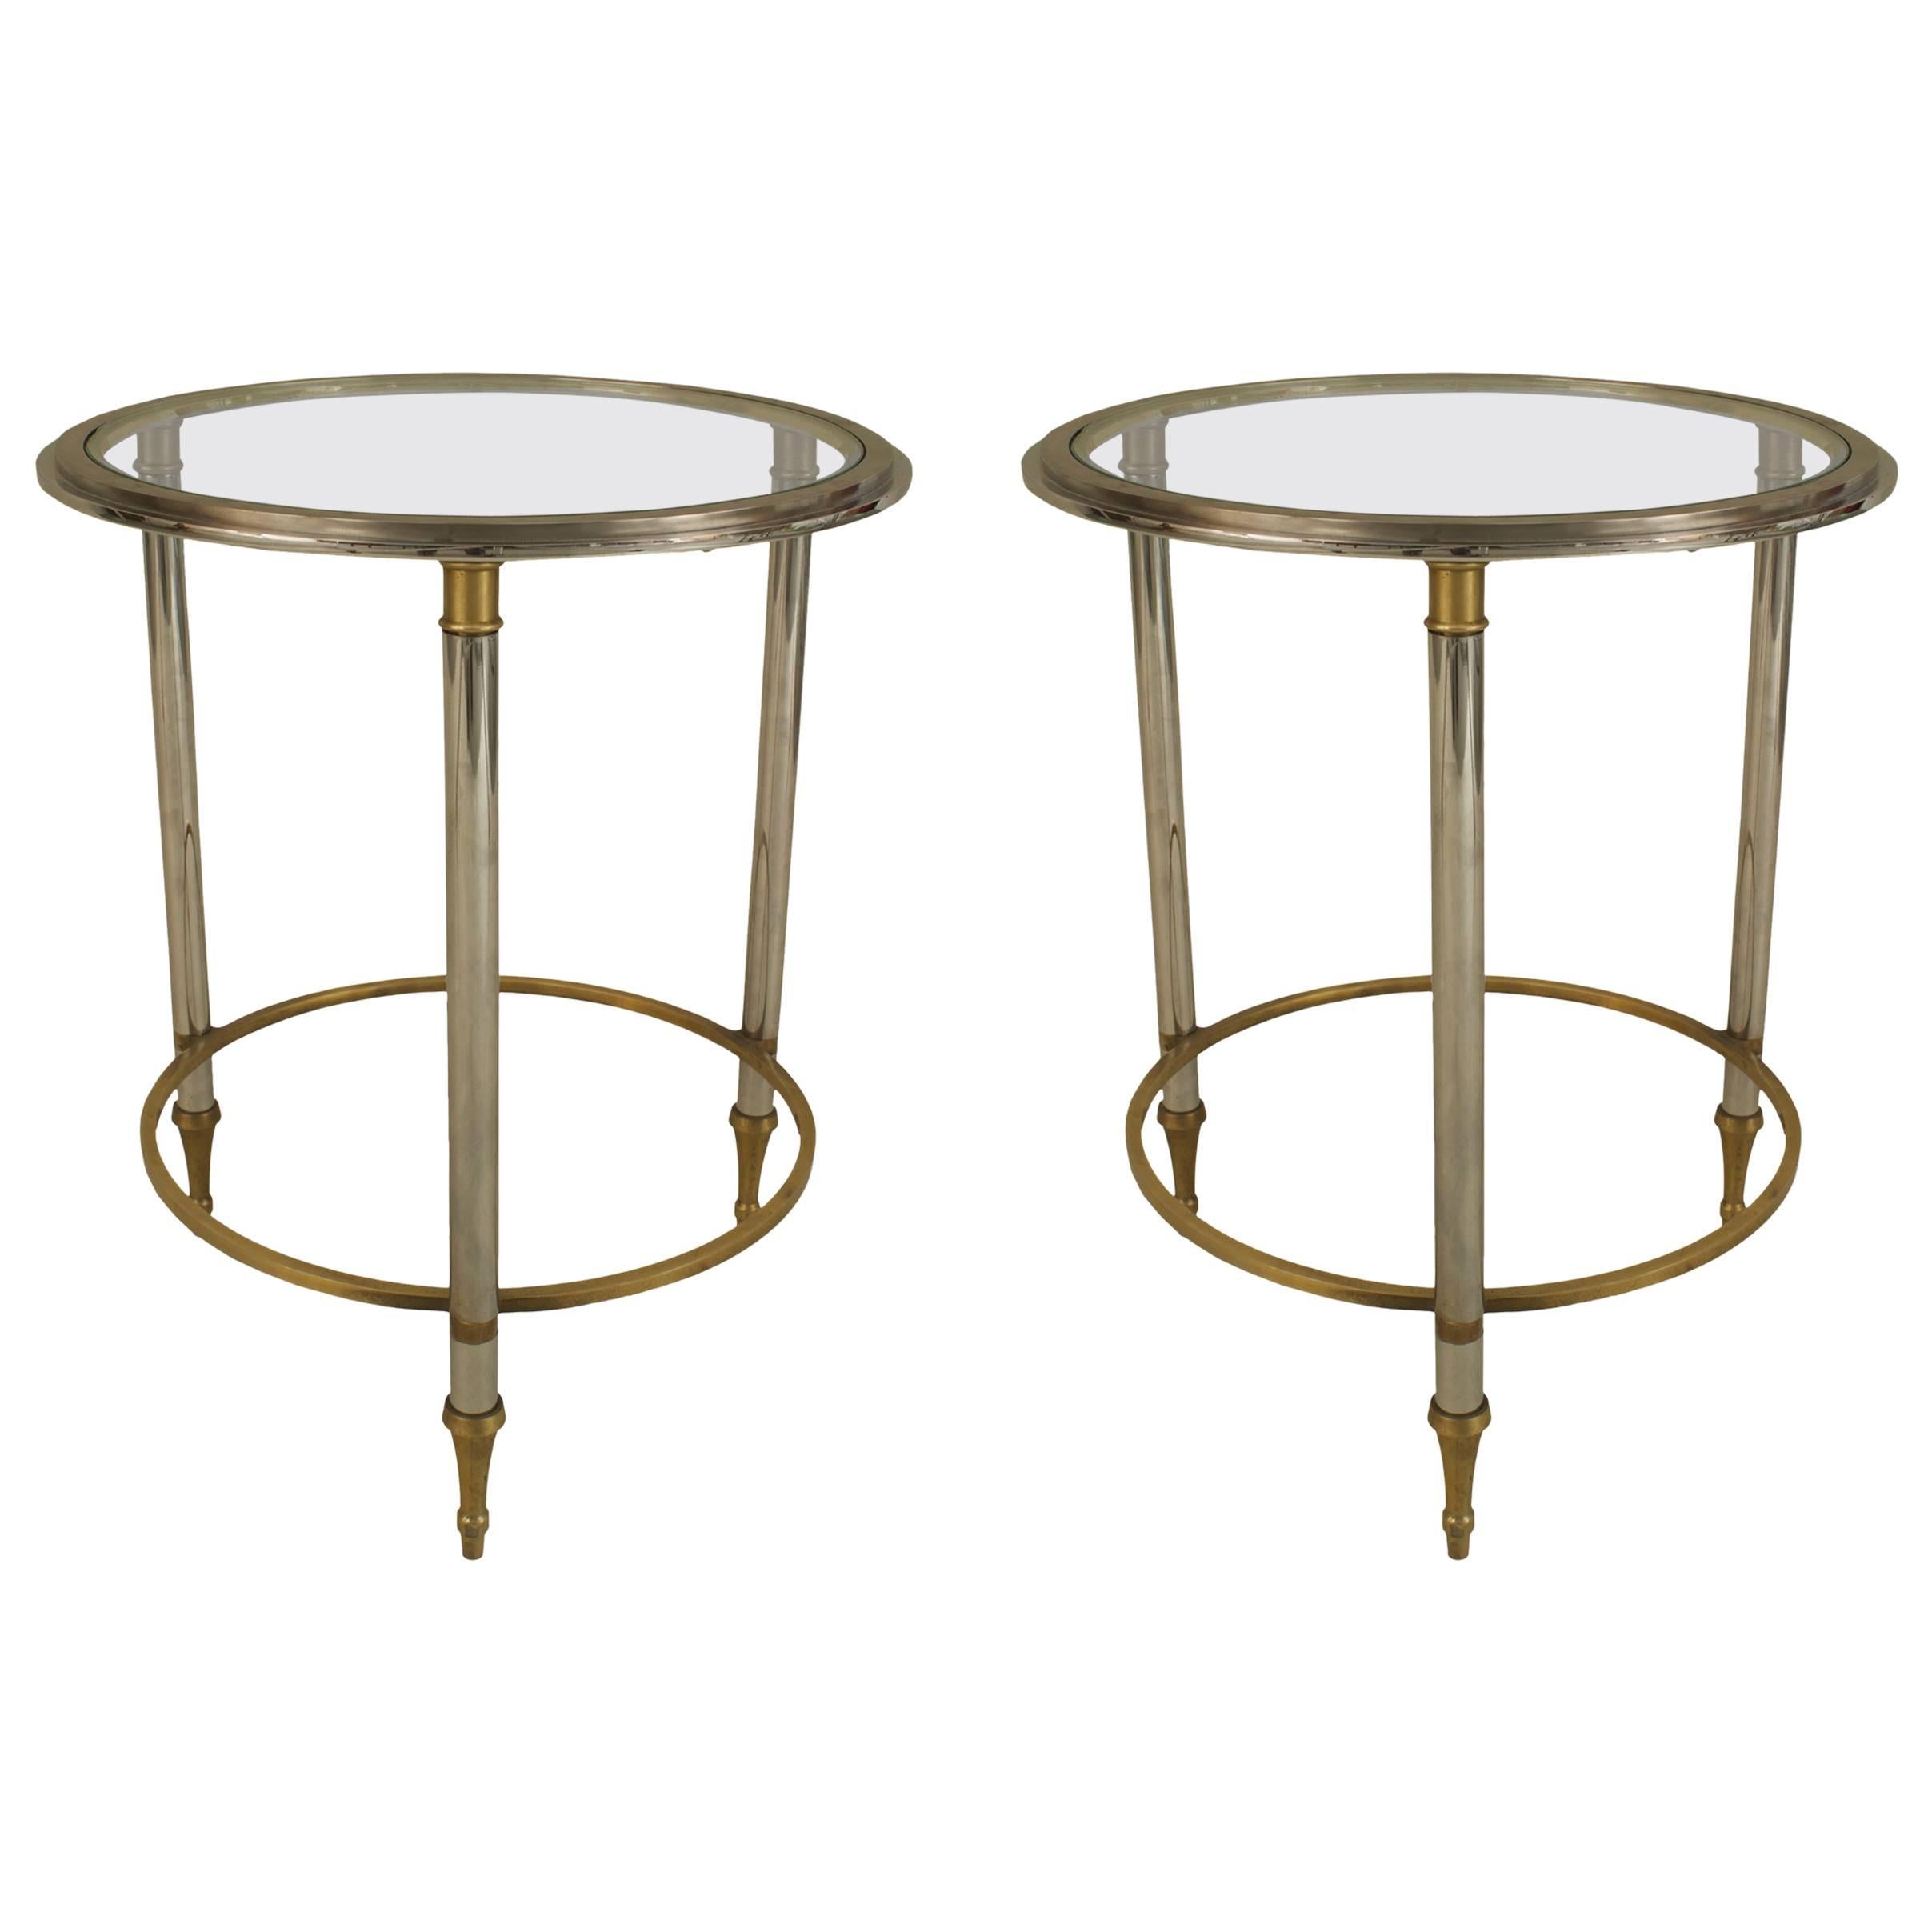 Pair of 1940s French Ormolu-Trimmed Glass End Tables, Attributed to Jansen